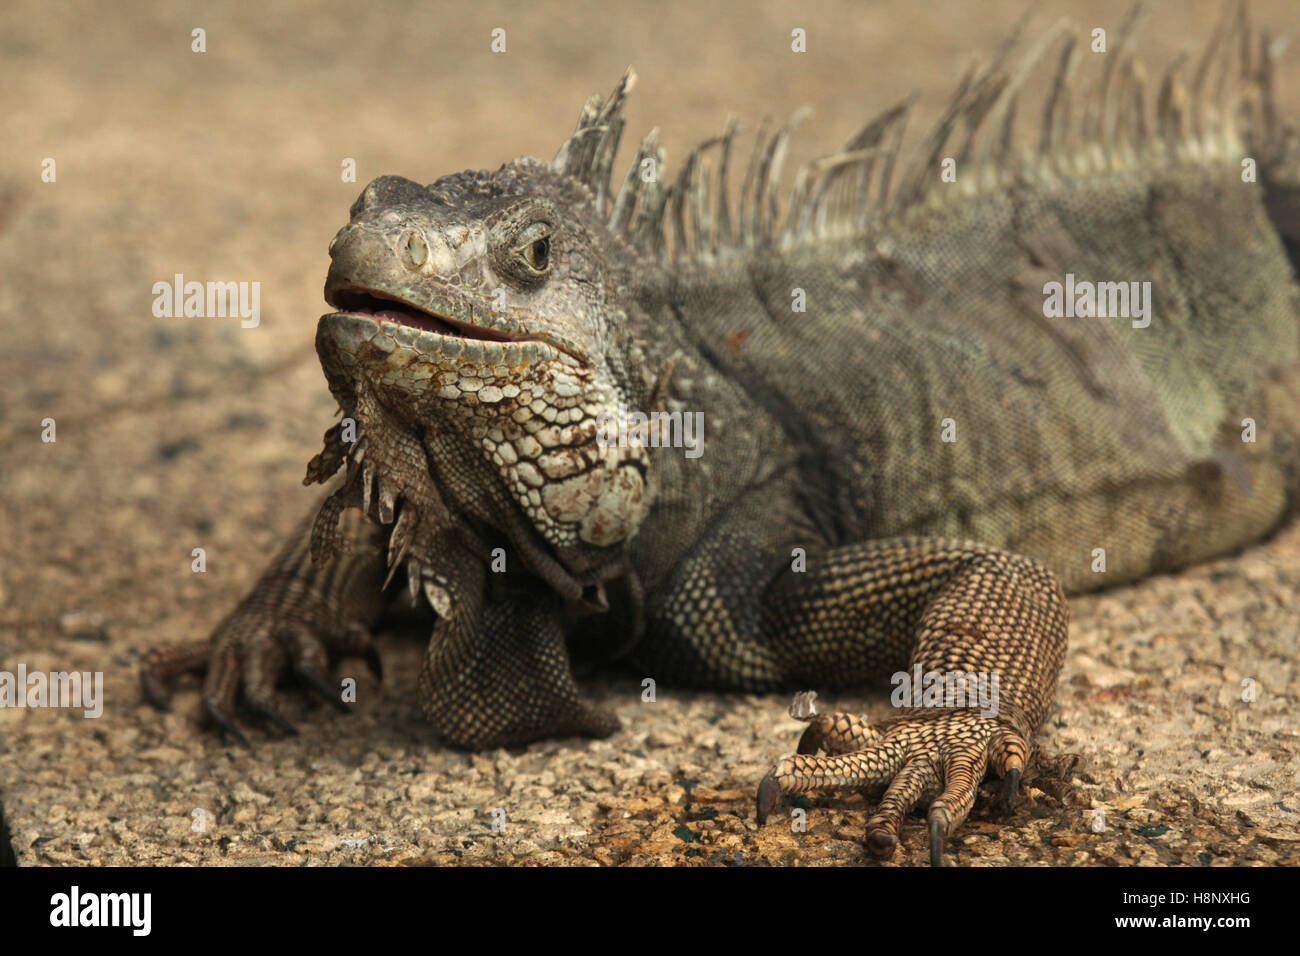 Beige Iguana stands on stone beige pebbles, Cartagena, Colombia, South America. Stock Photo